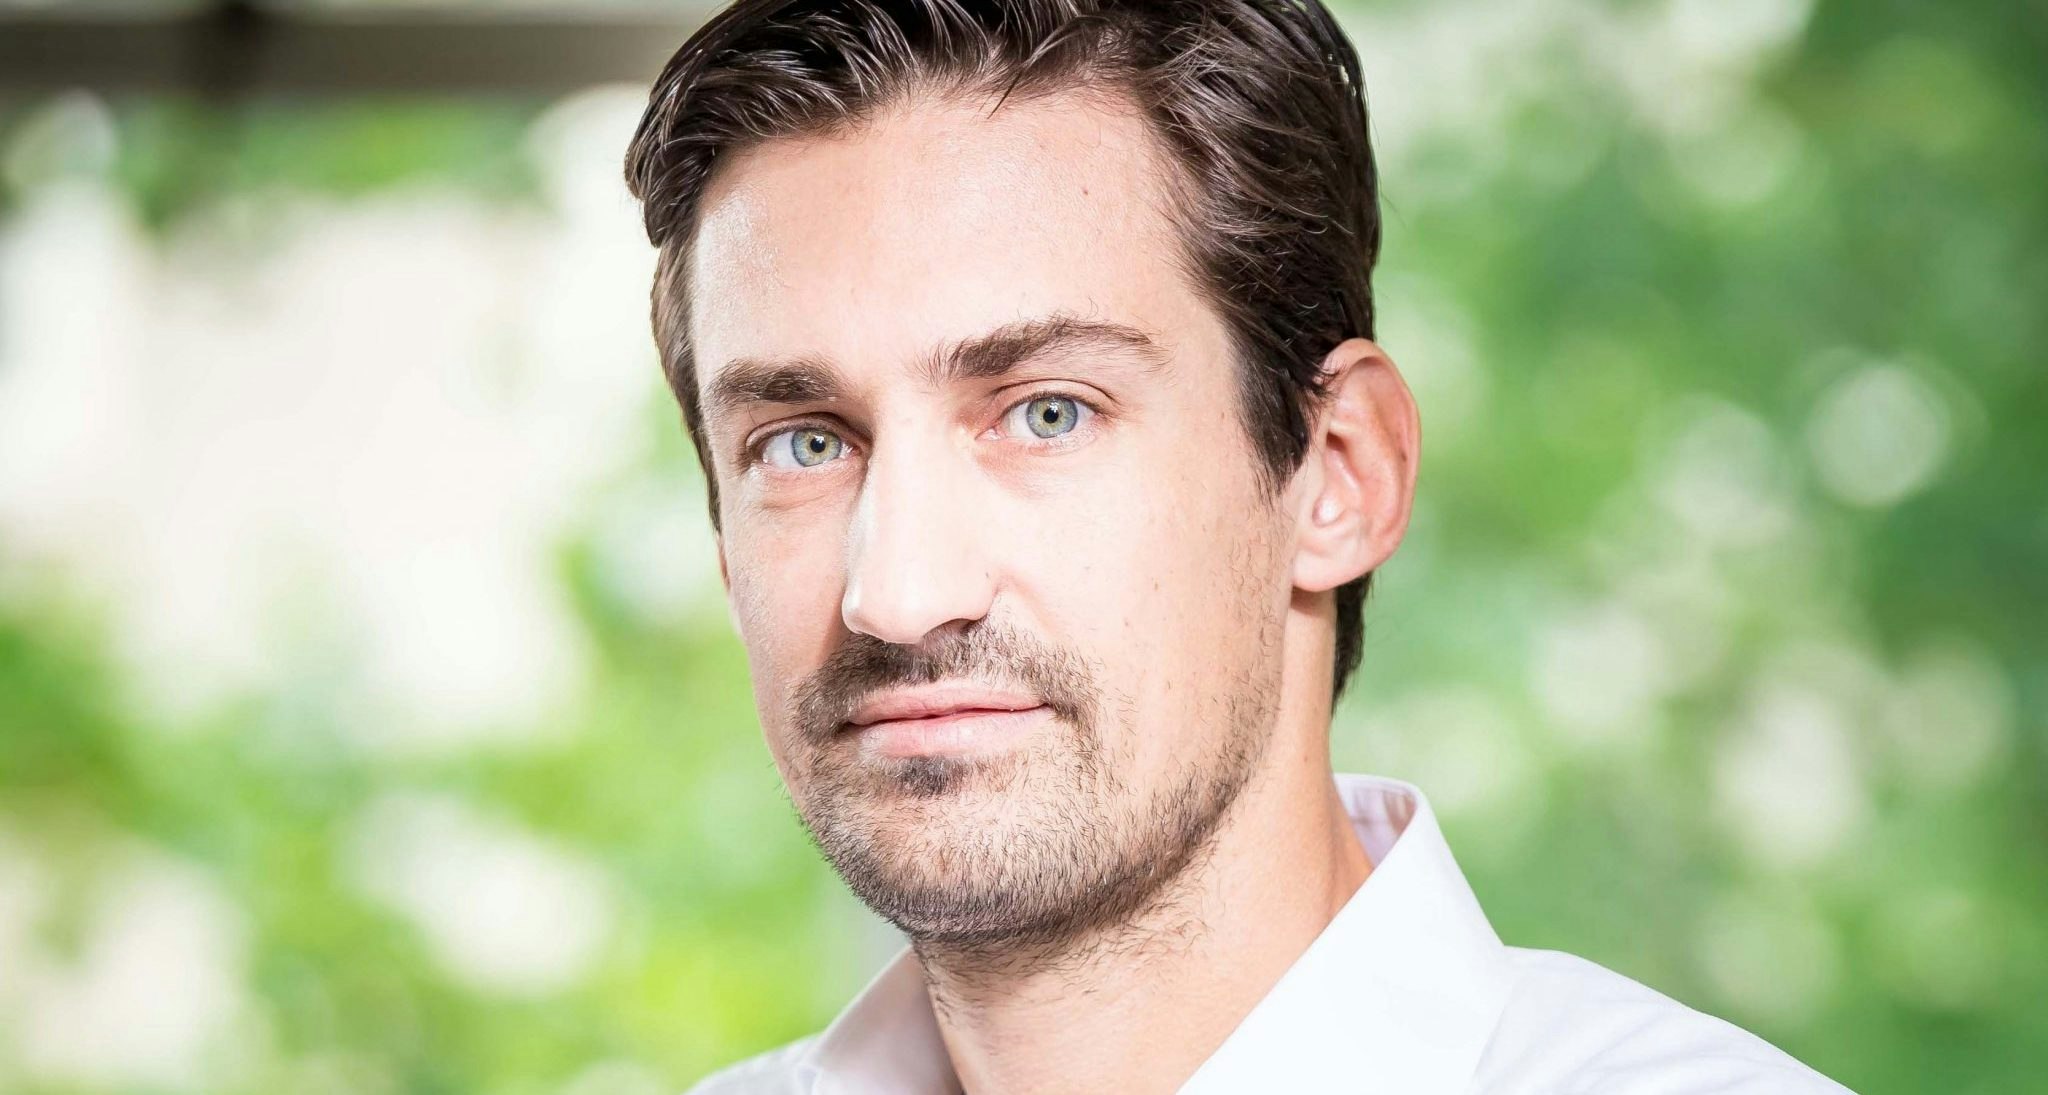 Photo of Guillaume Pousaz, founder and CEO of Checkout.com